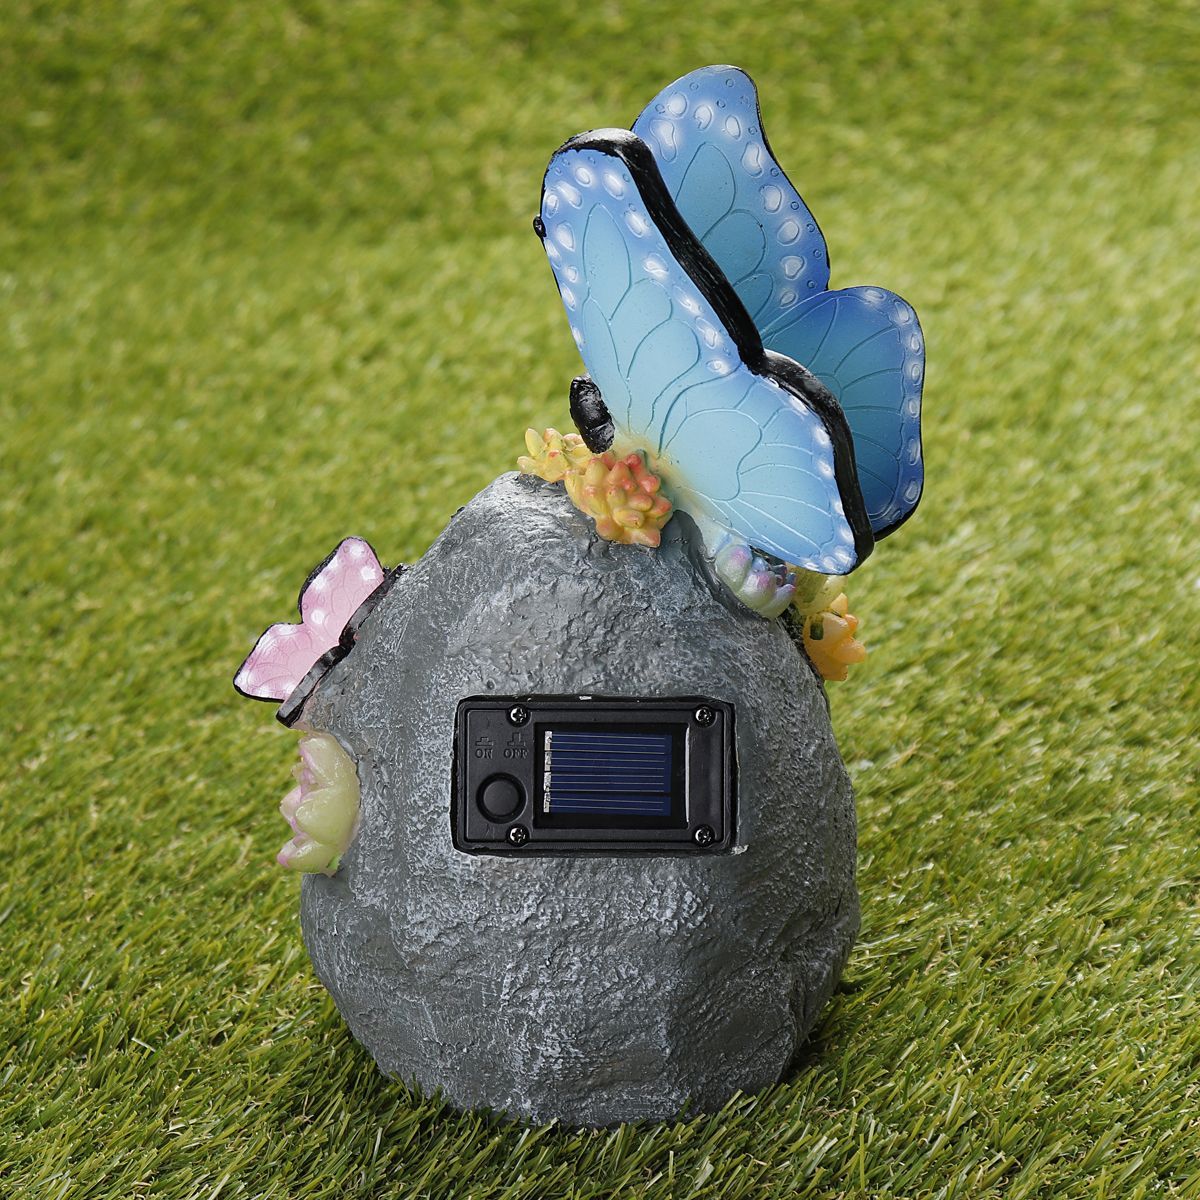 Outdoor-Garden-Solar-Animal-Butterfly-LED-Night-Light-Yard-Figurine-Lamps-Pathway-Decorations-1638908